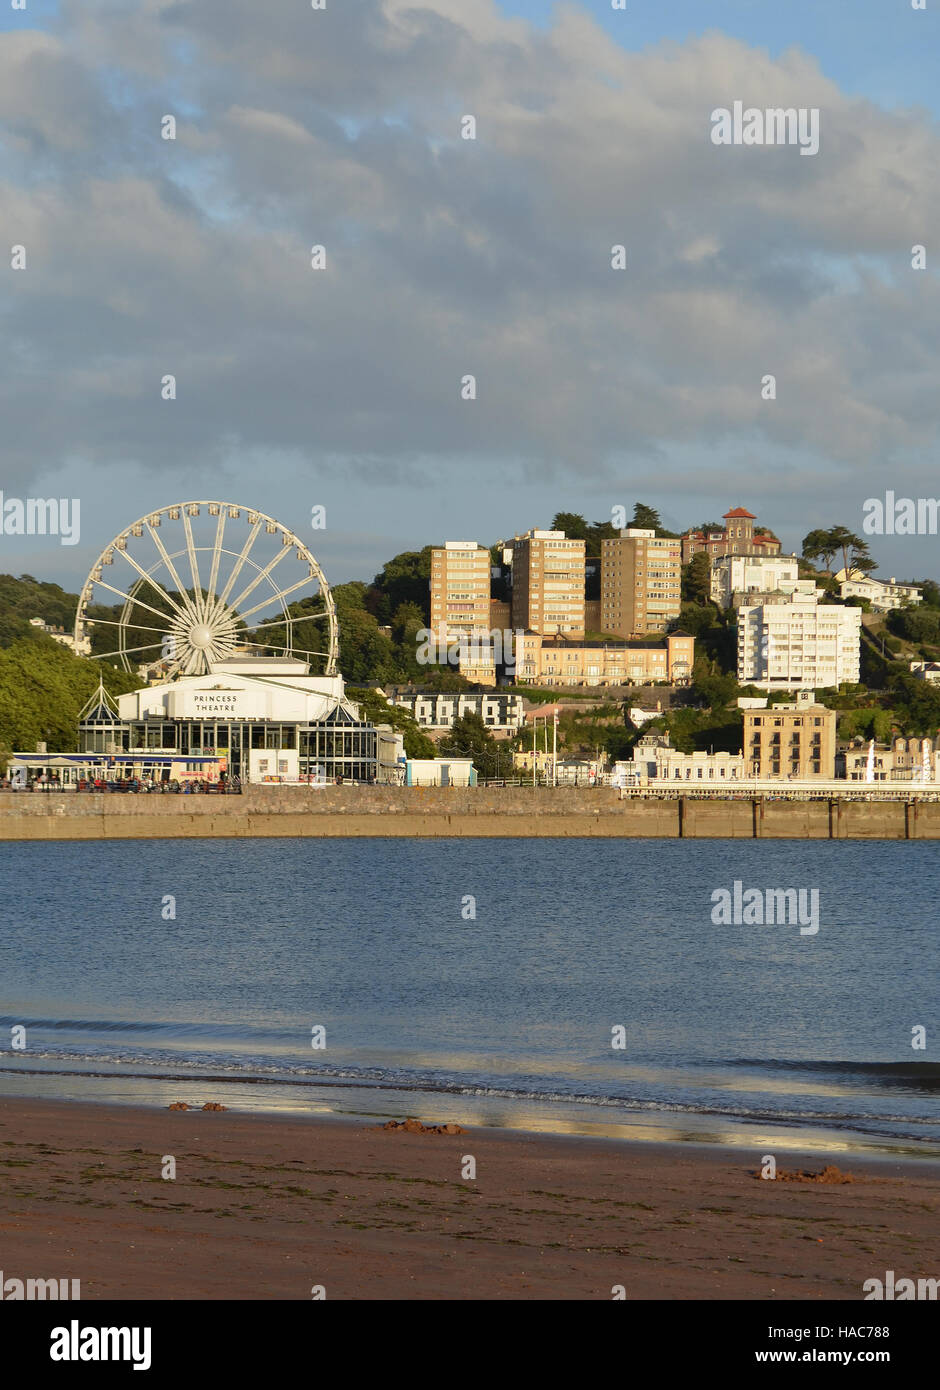 Seafront view of Torquay in Devon, England Stock Photo